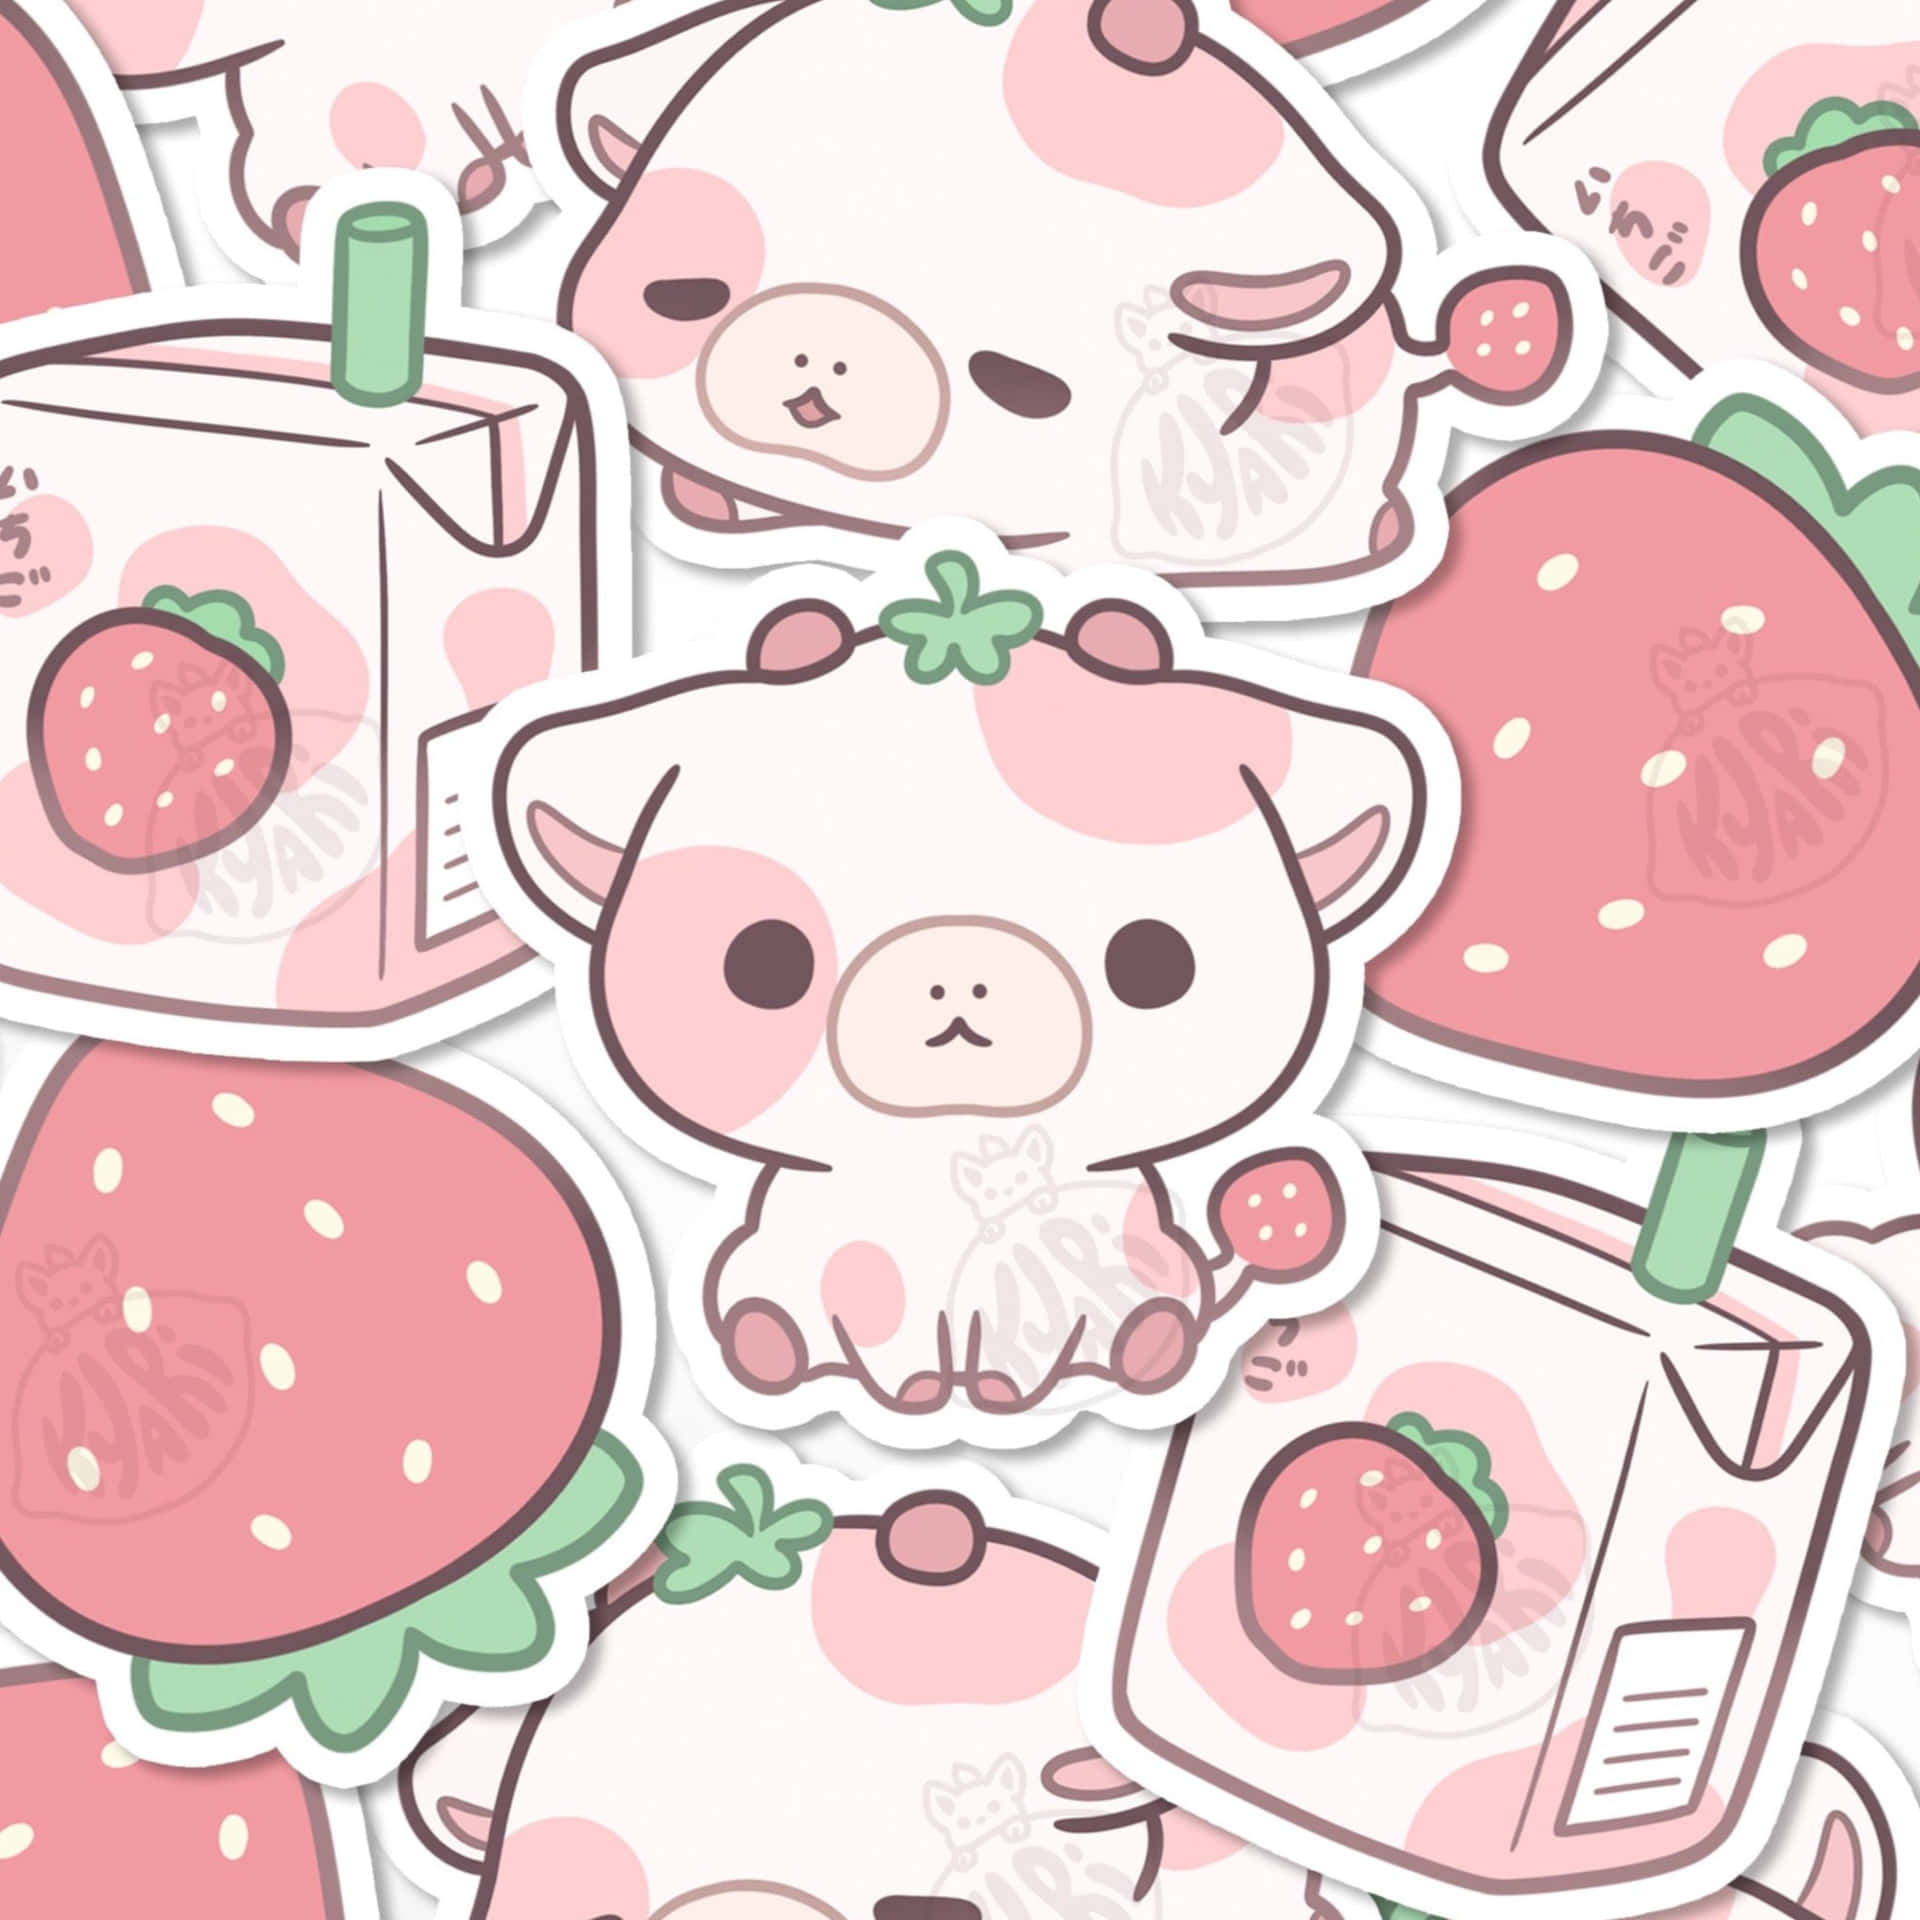 Aesthetic Wallpapers on X Pink strawberry cow themed wallpaper wallpaper  pink strawberry cute strawberrycow httpstcocboT9K5s6o  X